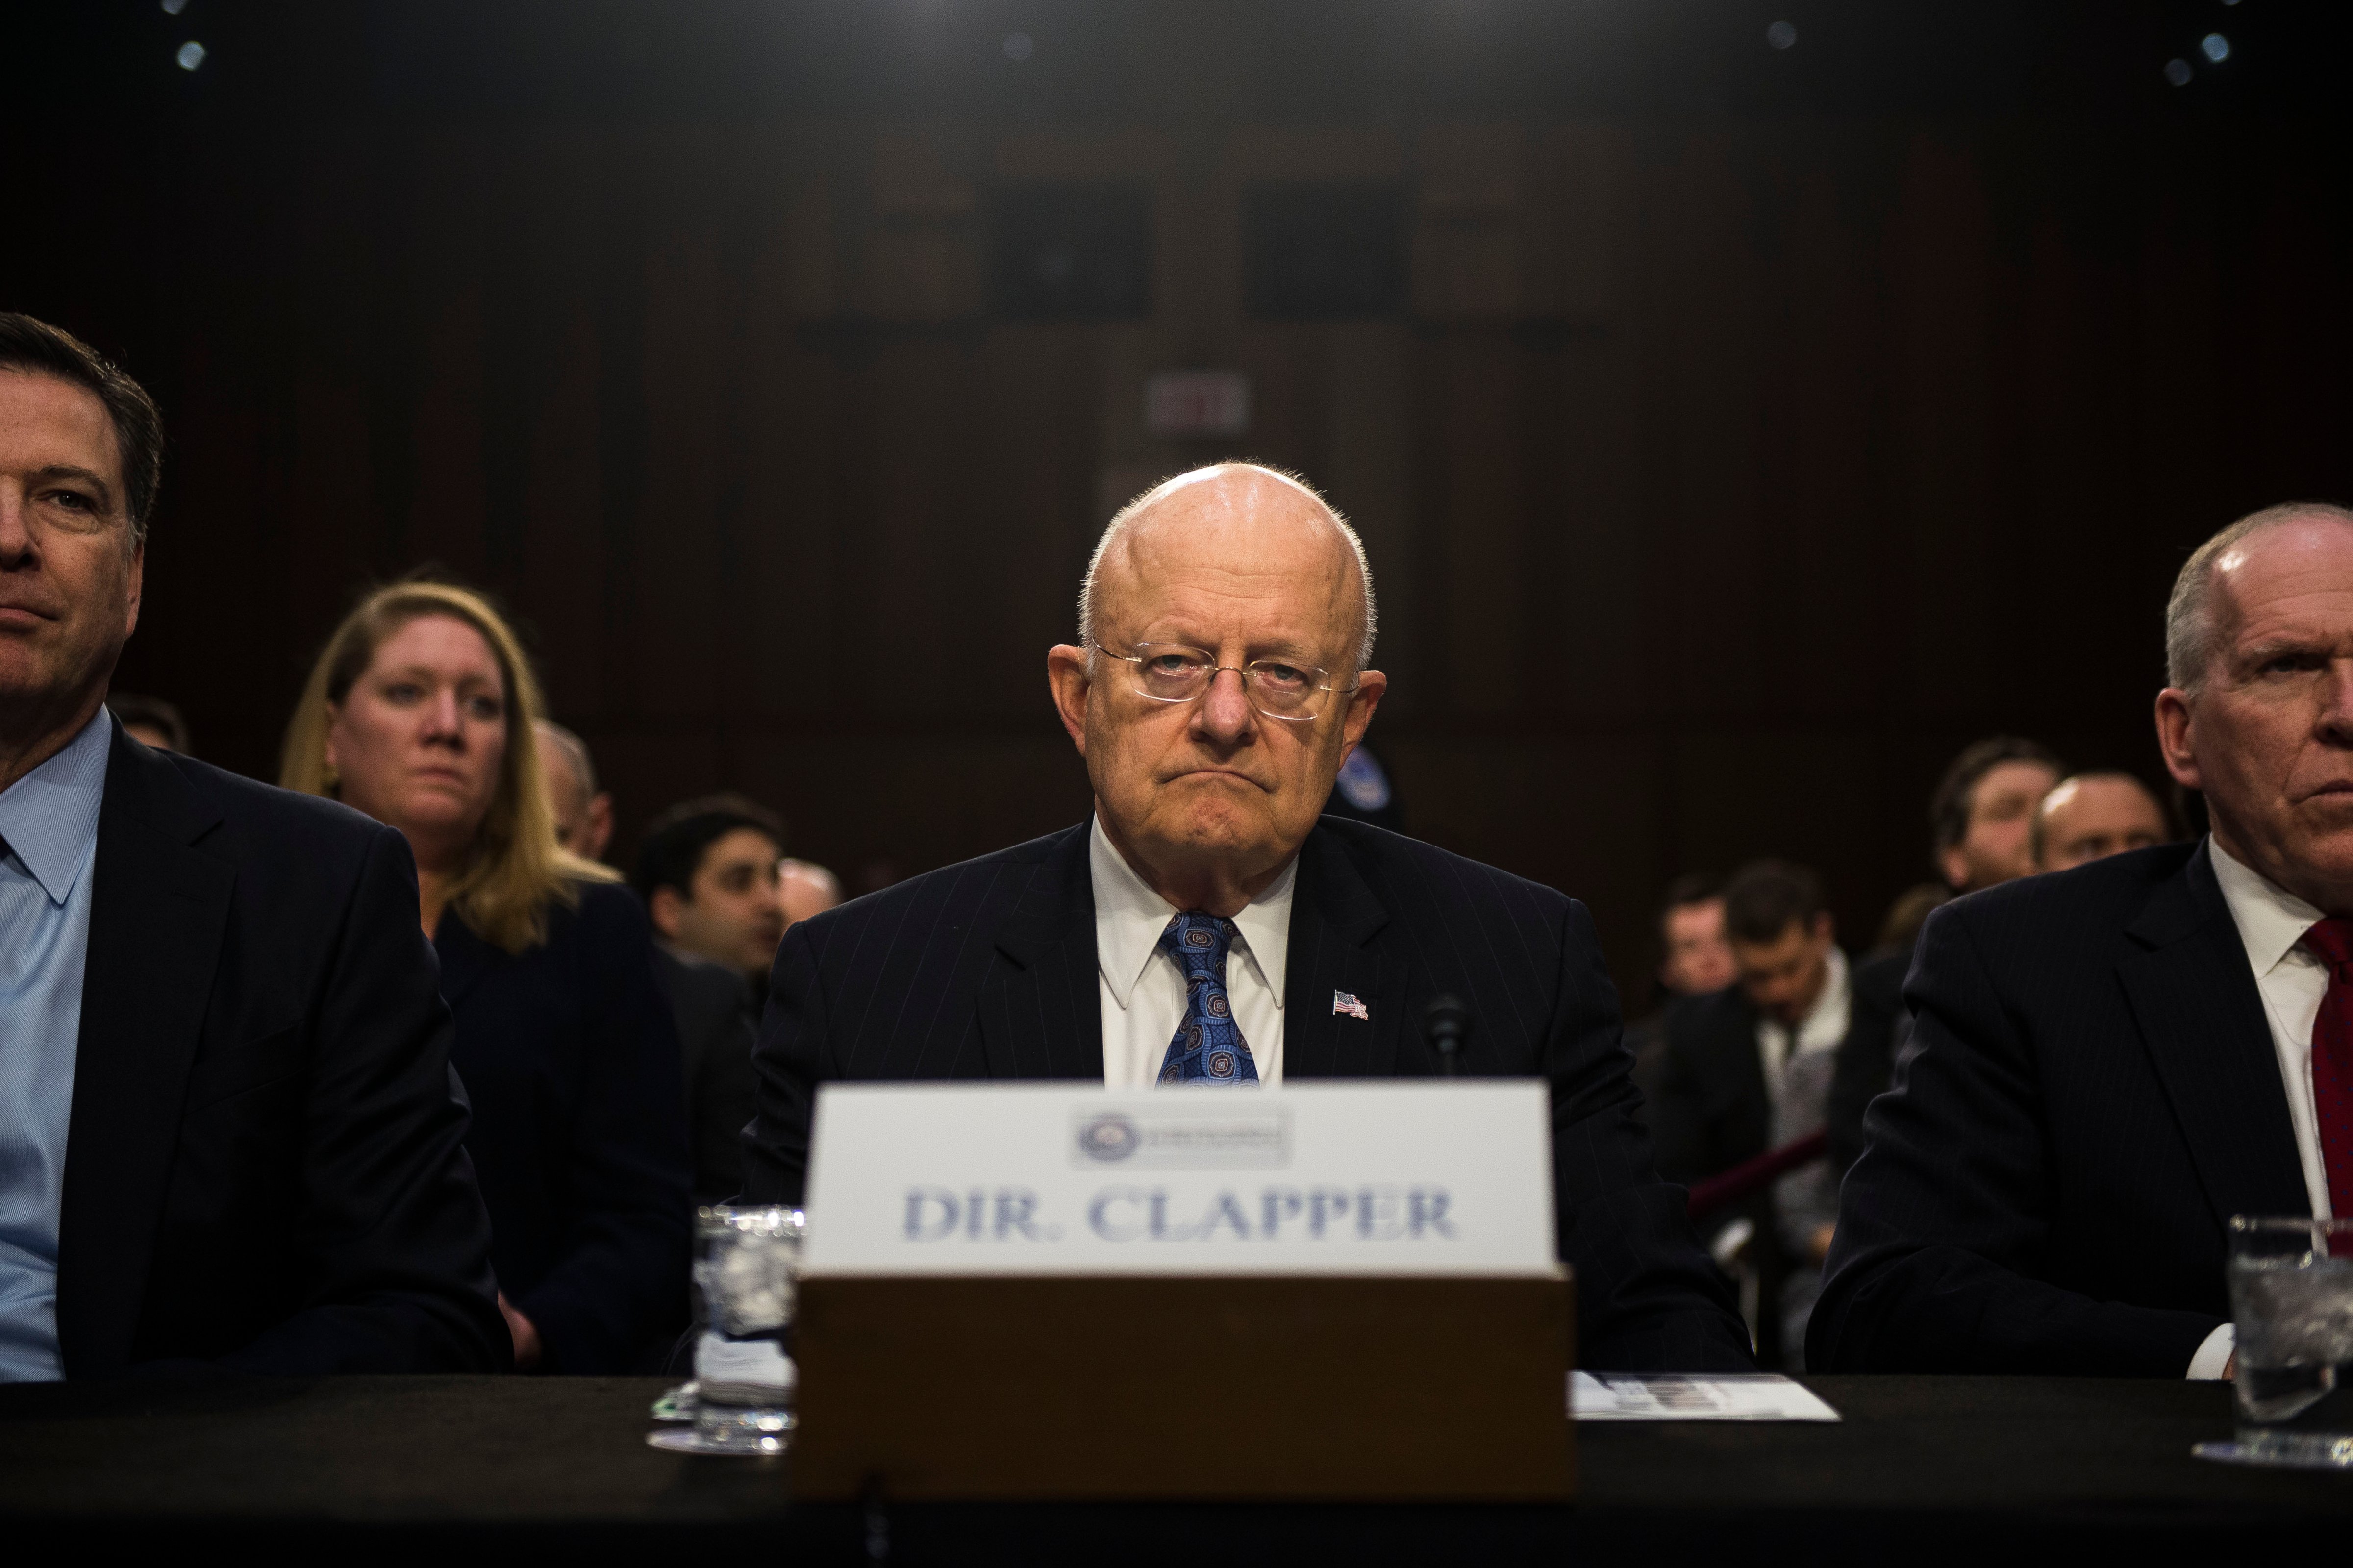 Director of National Intelligence James Clapper waits for the Senate (Select) Intelligence Committee hearing on worldwide threats to America and its allies to begin at the Hart Senate Building on Feb. 9, 2016 in Washington, D.C. (Gabriella Demczuk/Getty Images)